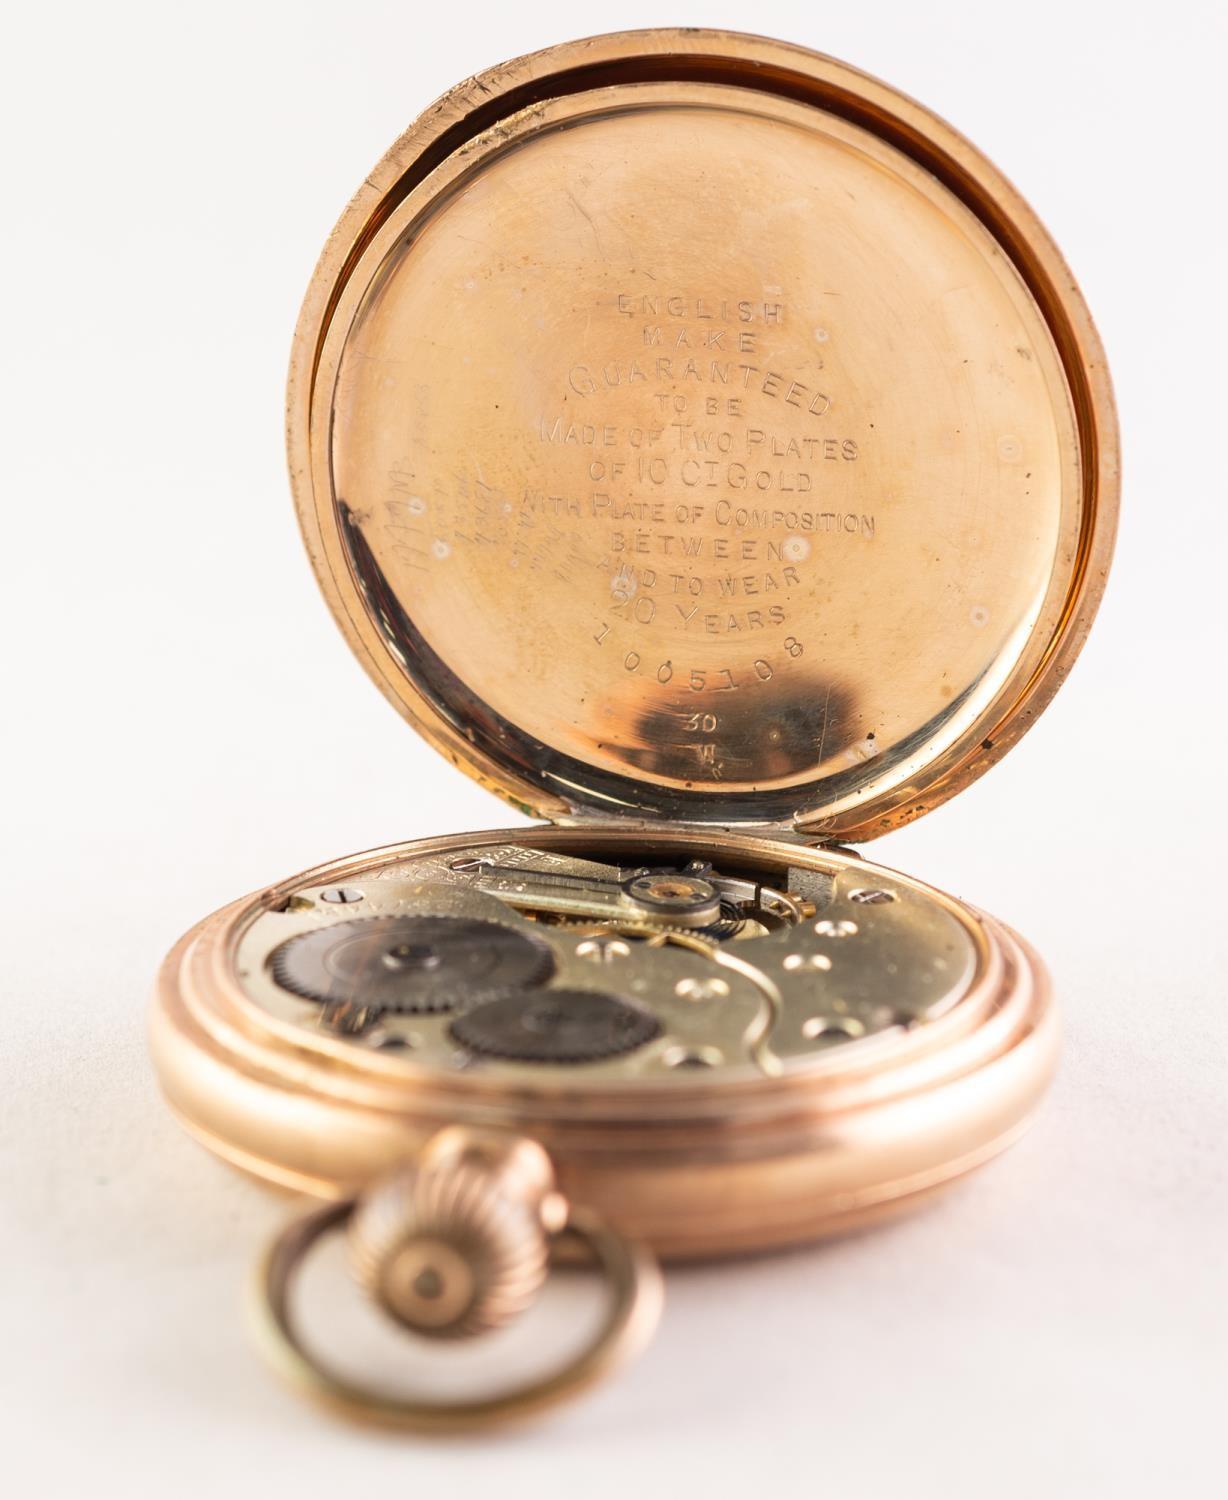 MORATH BROTHERS, LIVERPOOL, ROLLED GOLD FULL HUNTER POCKET WATCH with keyless Swiss movement, - Image 3 of 3